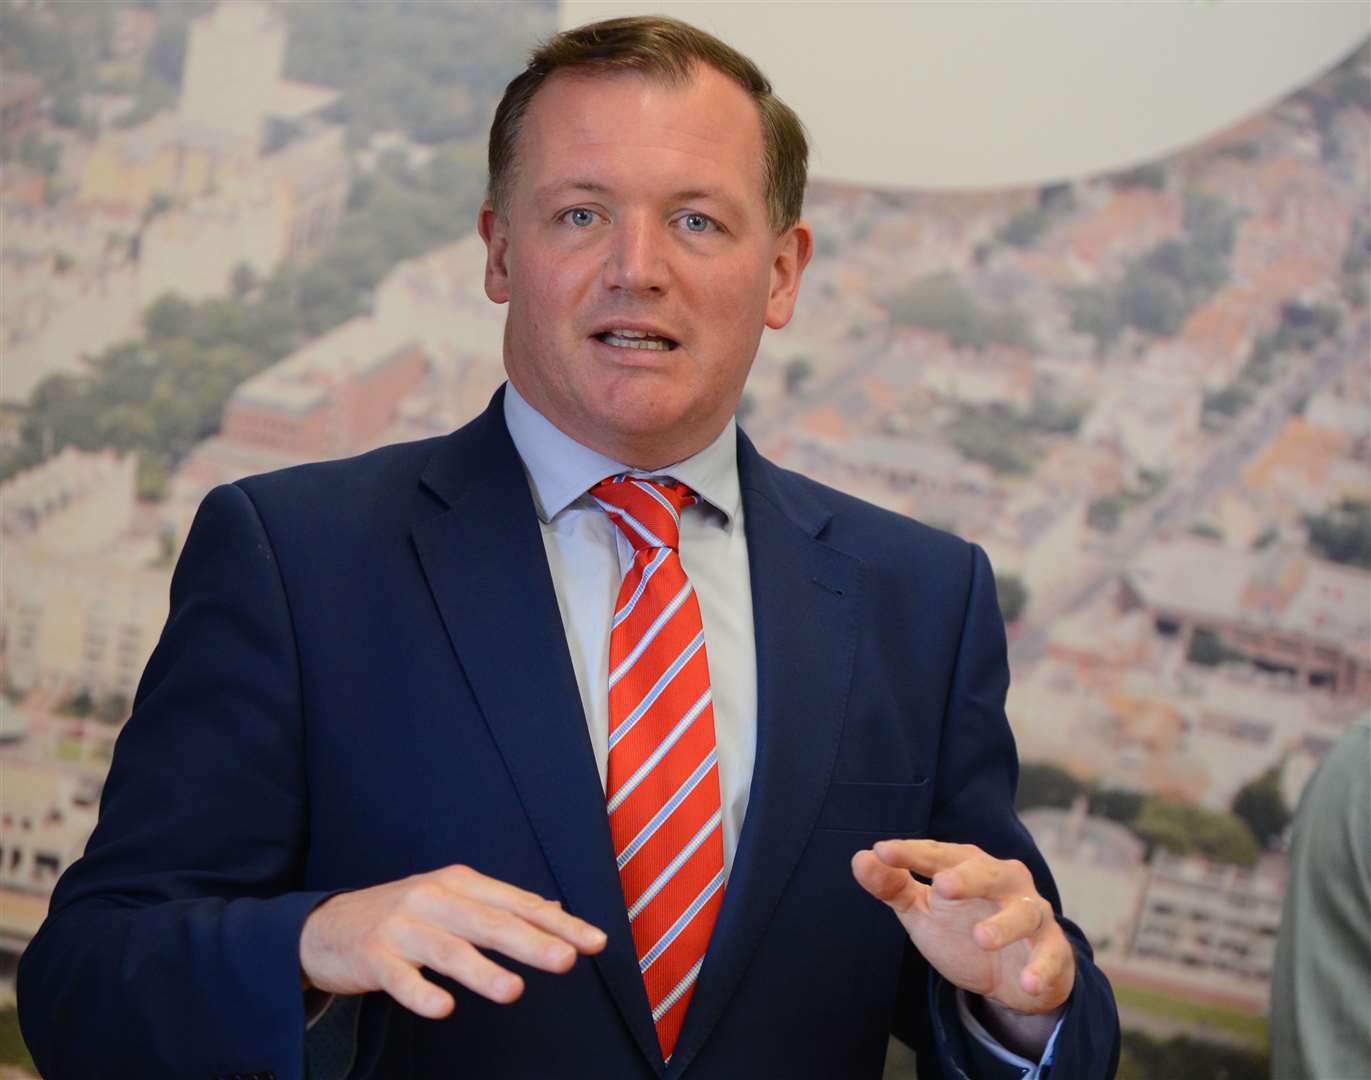 Folkestone and Hythe Tory MP Damian Collins will lose his seat to Labour, according to the poll